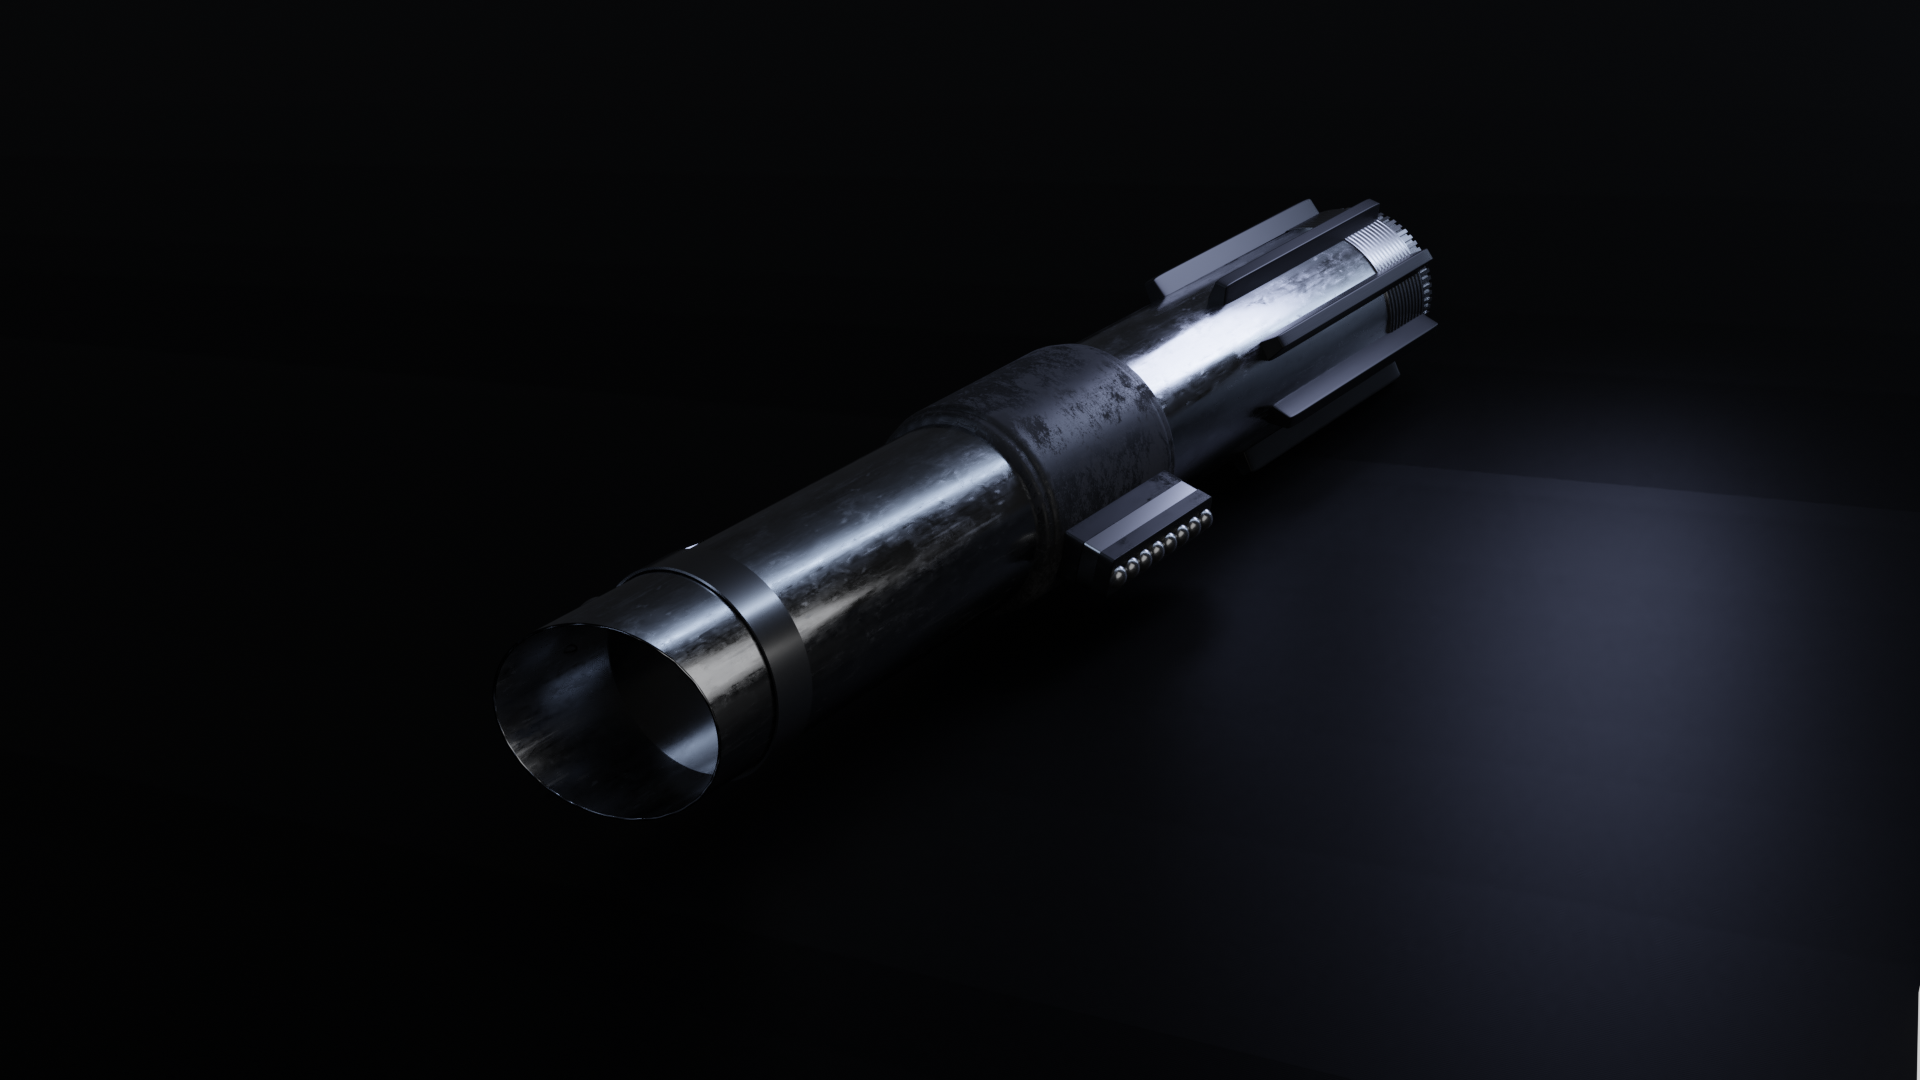 The Chosen one comes to Star Wars Battlefront 2 soon. And for that I modeled and rendered his lightsaber. Might not be accurate 100% since I had loads of reference pics and